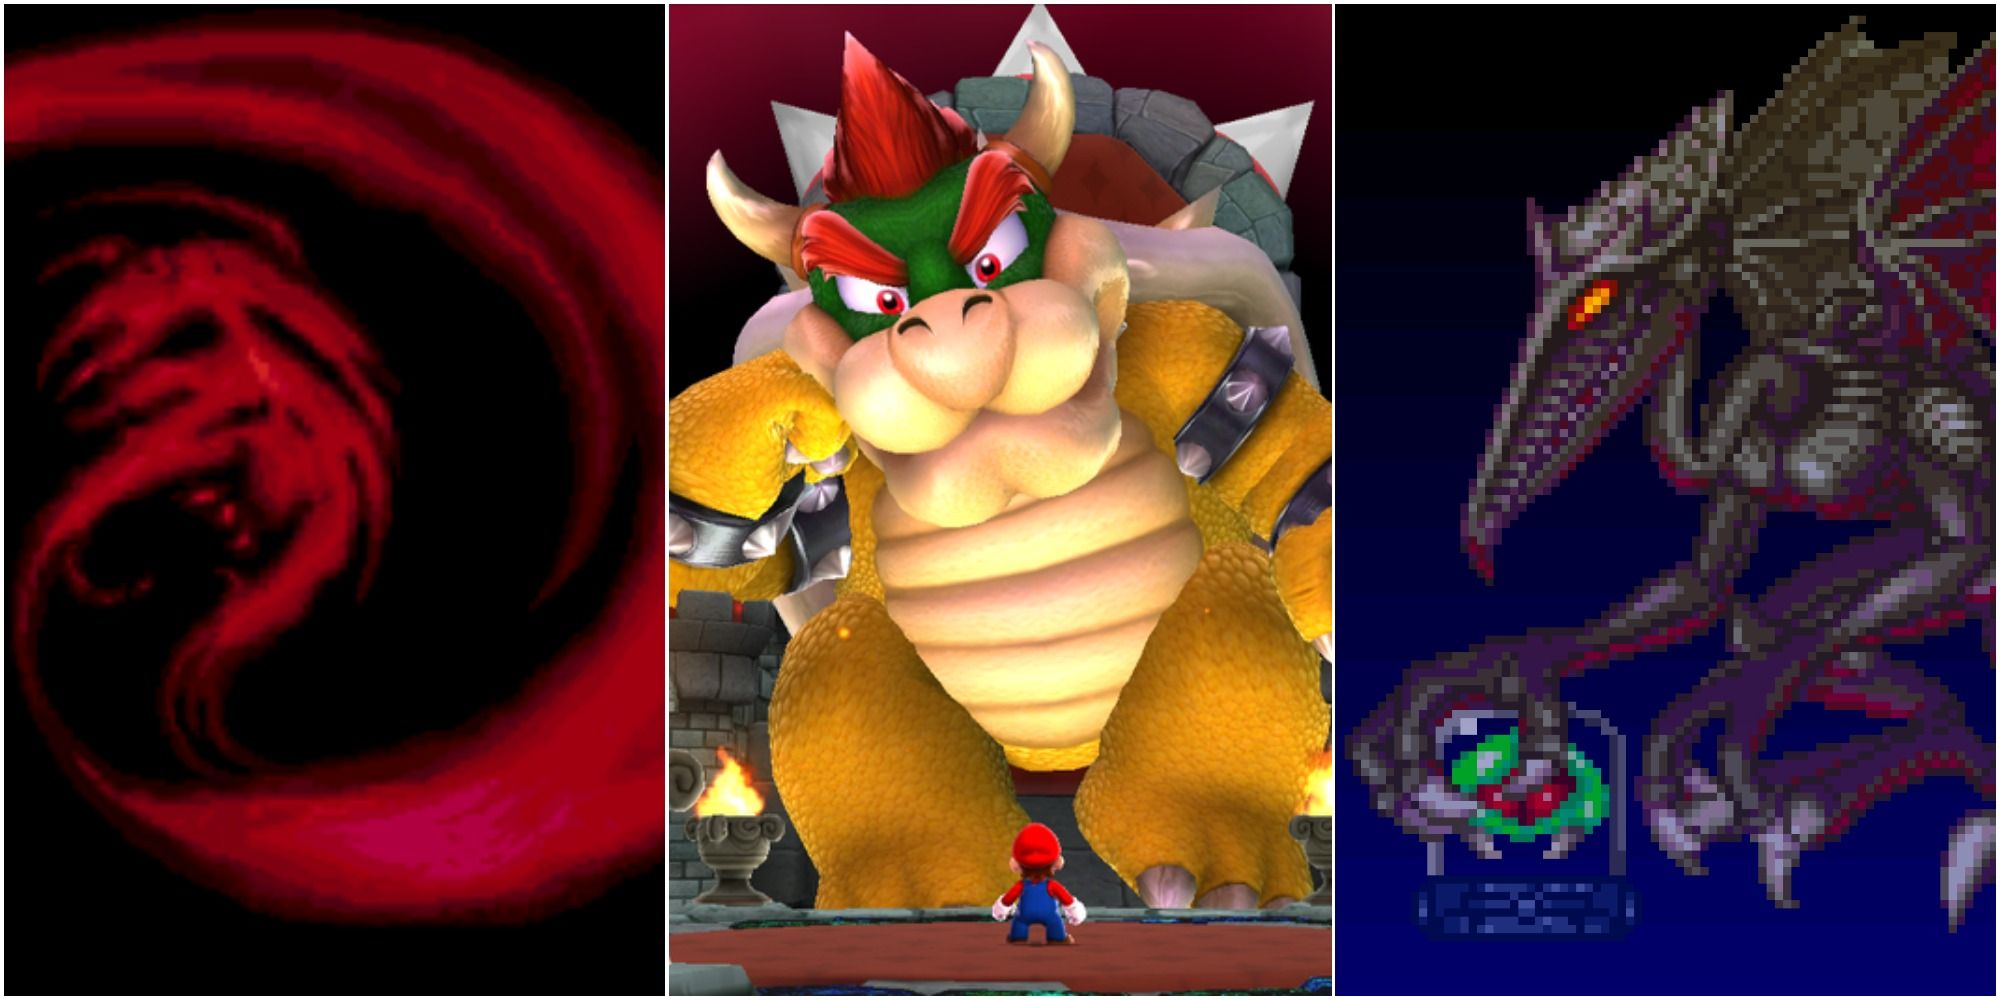 Split image screenshots of Giygas from EarthBound, Bowser from Mario and Ridley from Metroid.